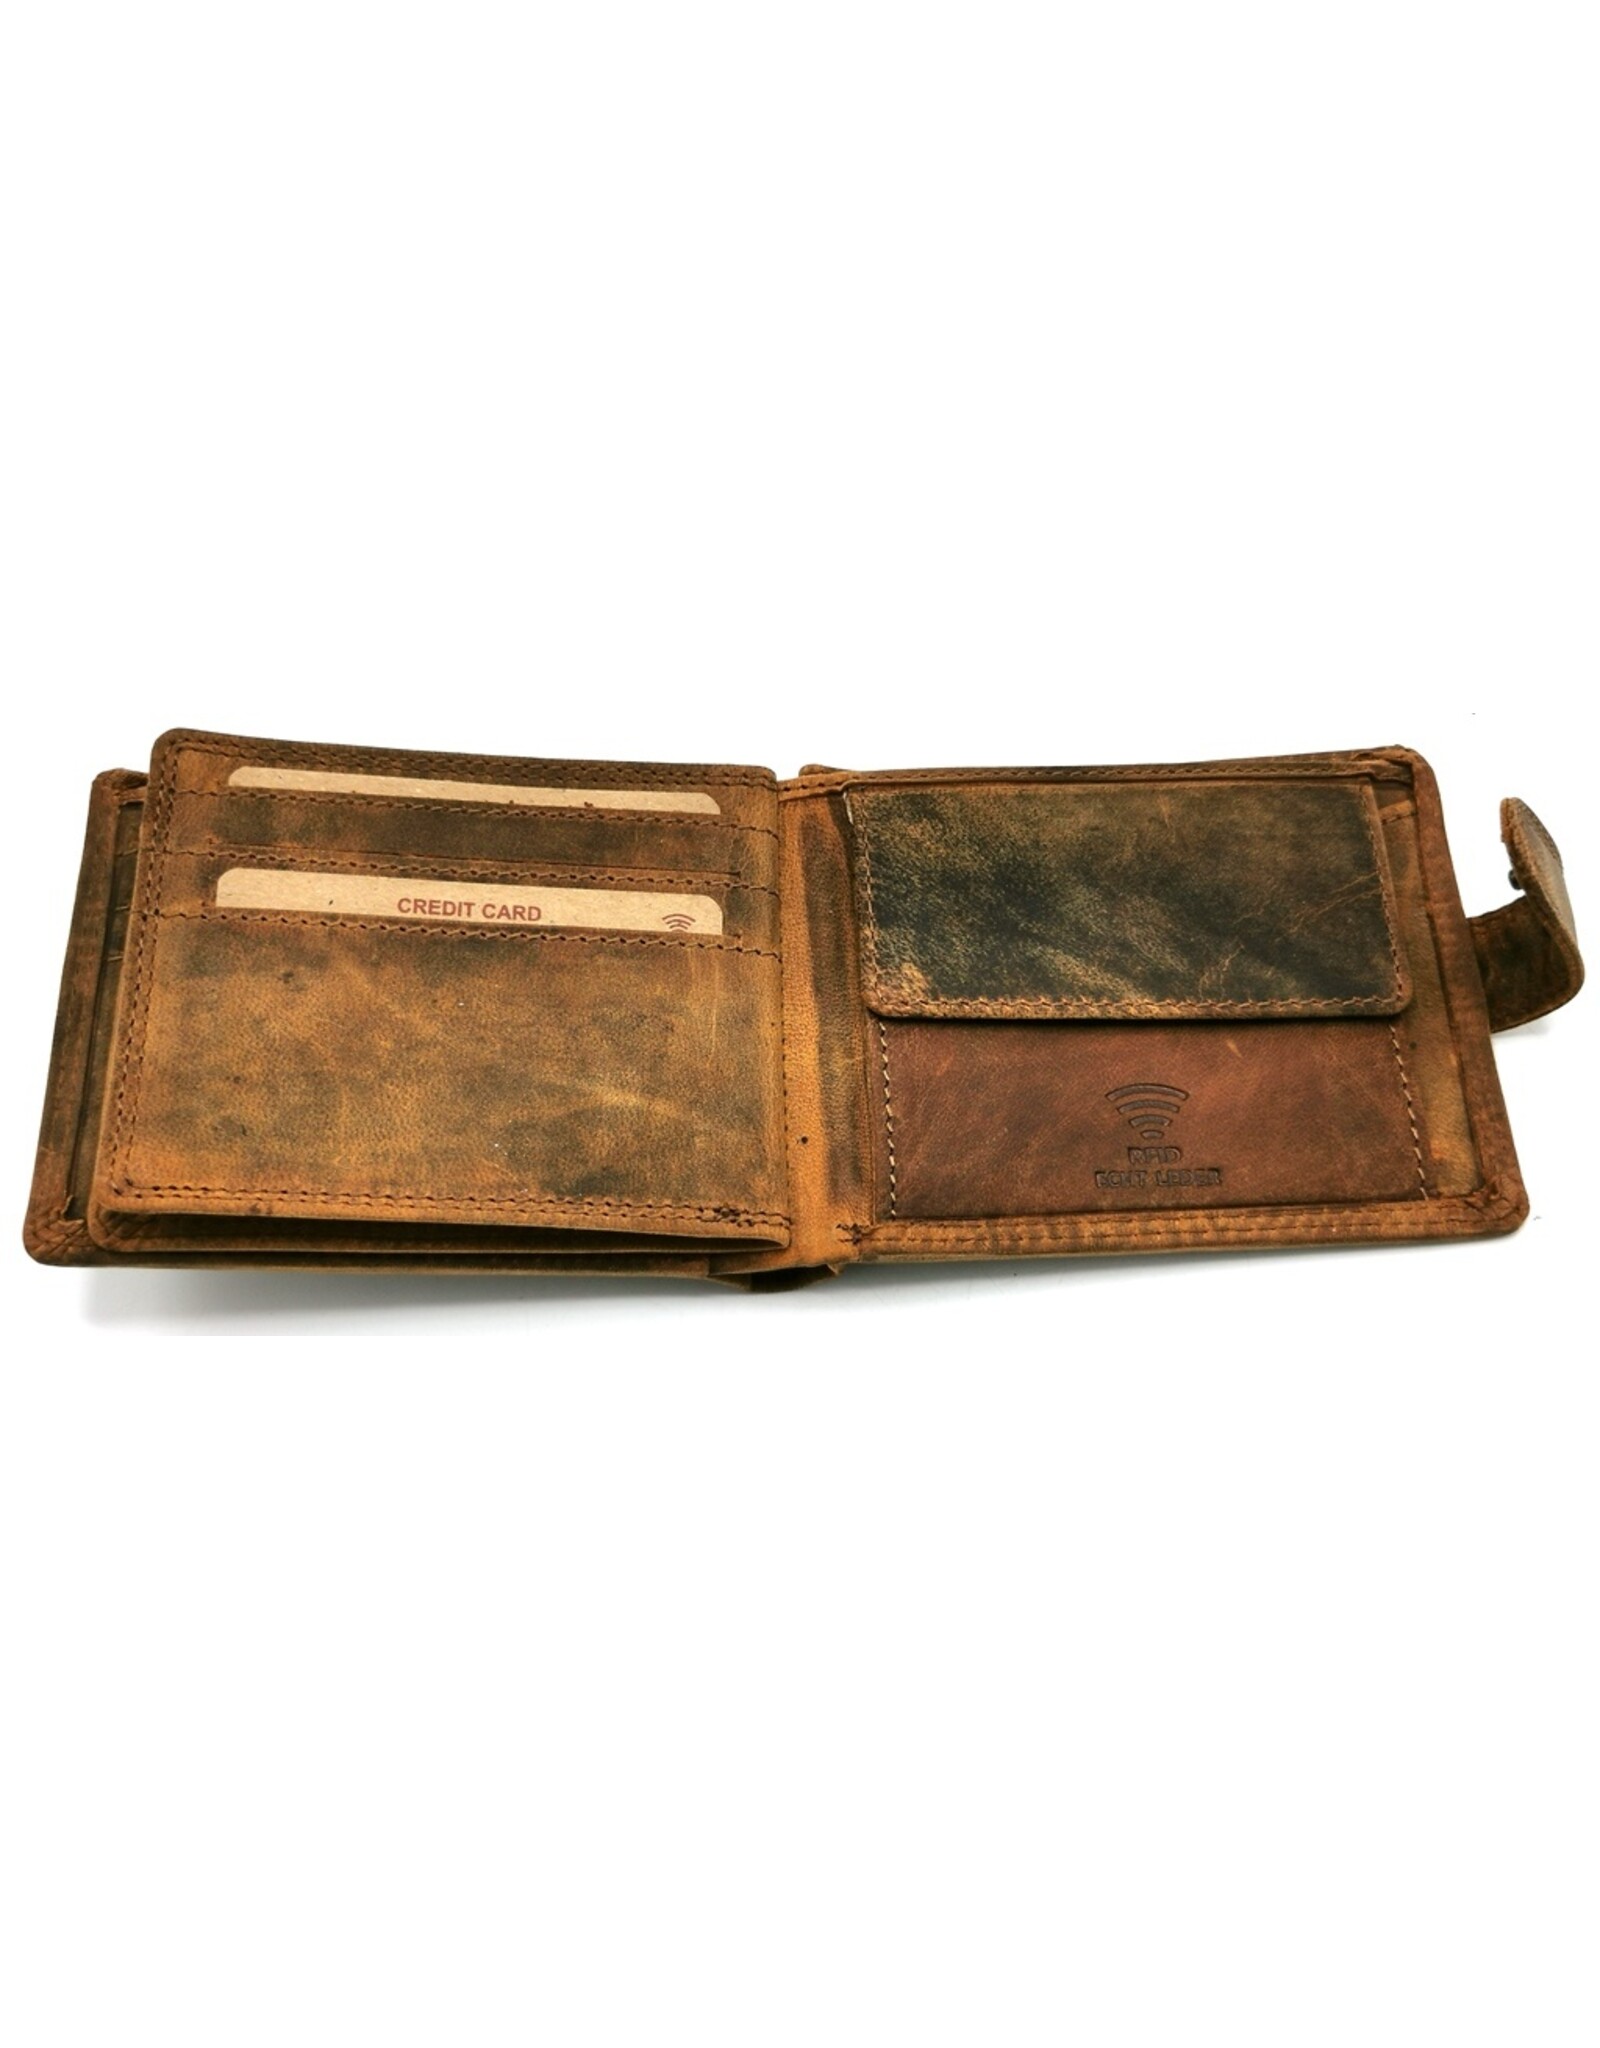 Leather Fox Leather Wallets -  Leather Wallet with embossed Wolf Buffalo Leather